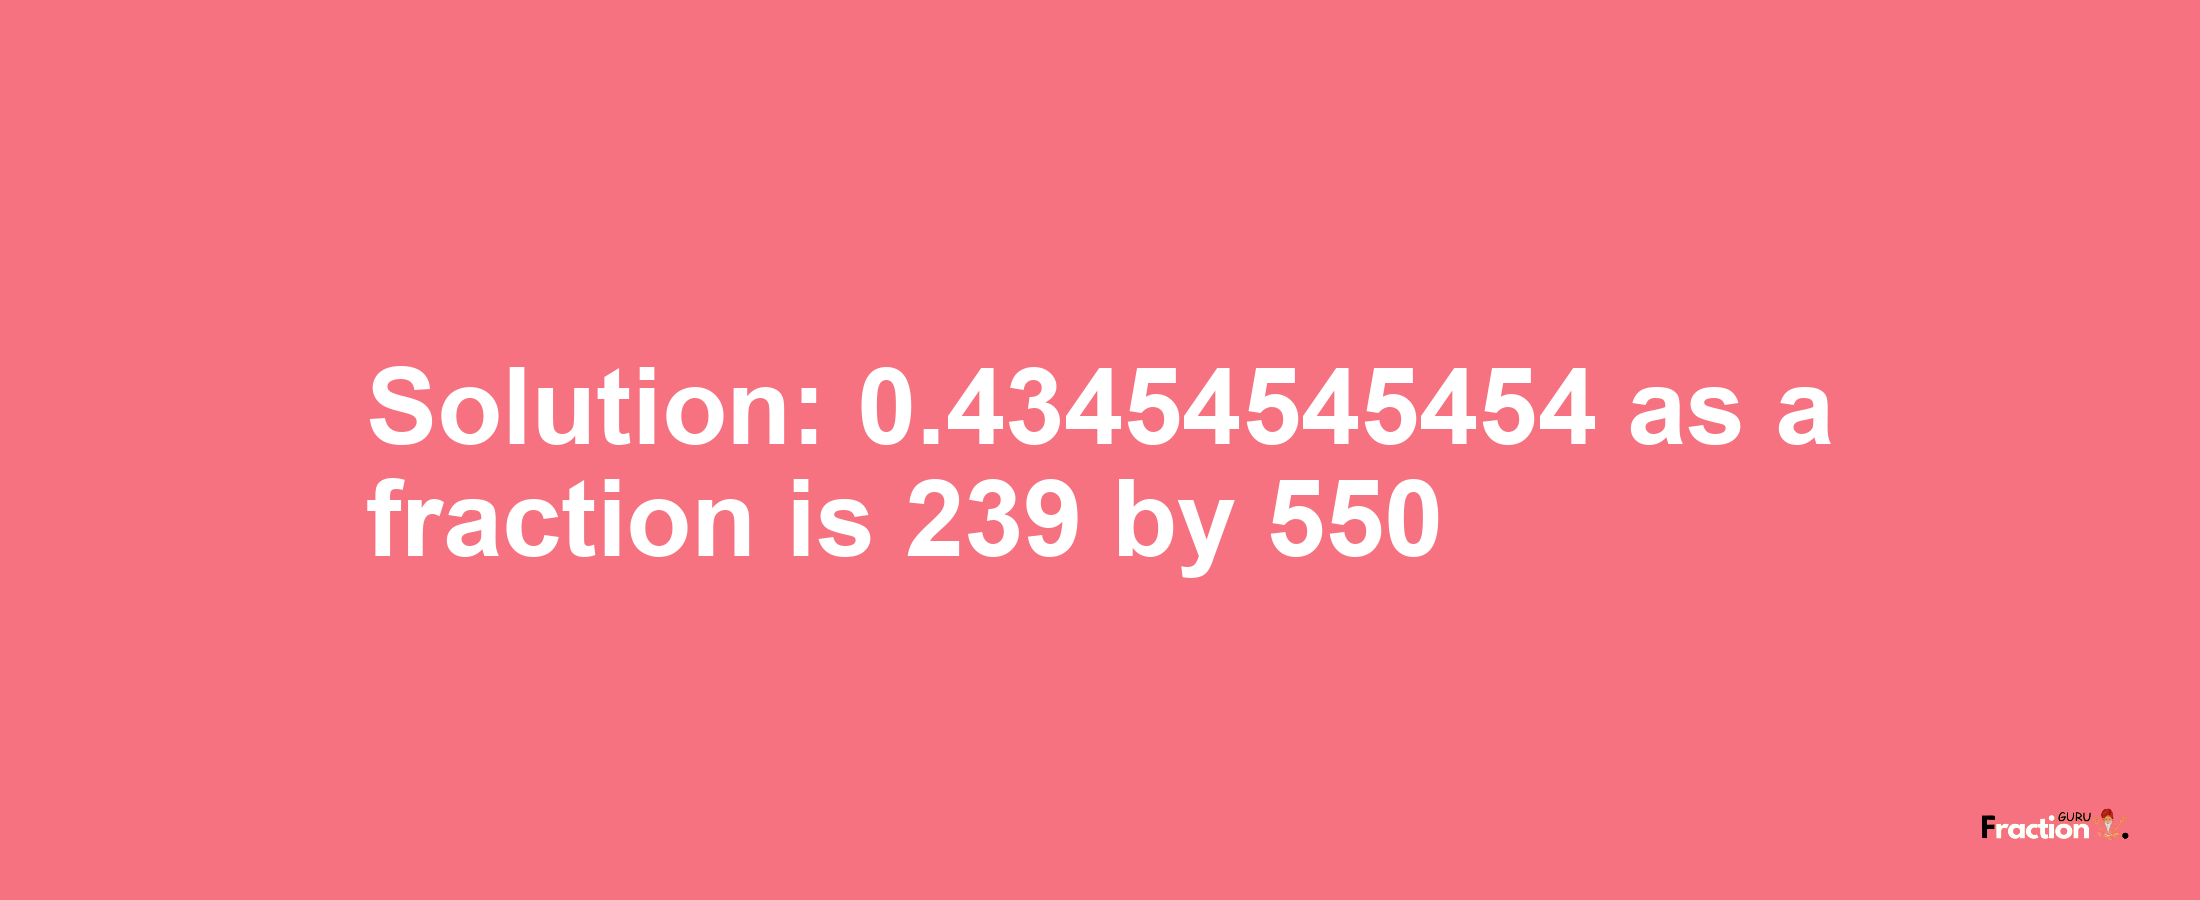 Solution:0.43454545454 as a fraction is 239/550